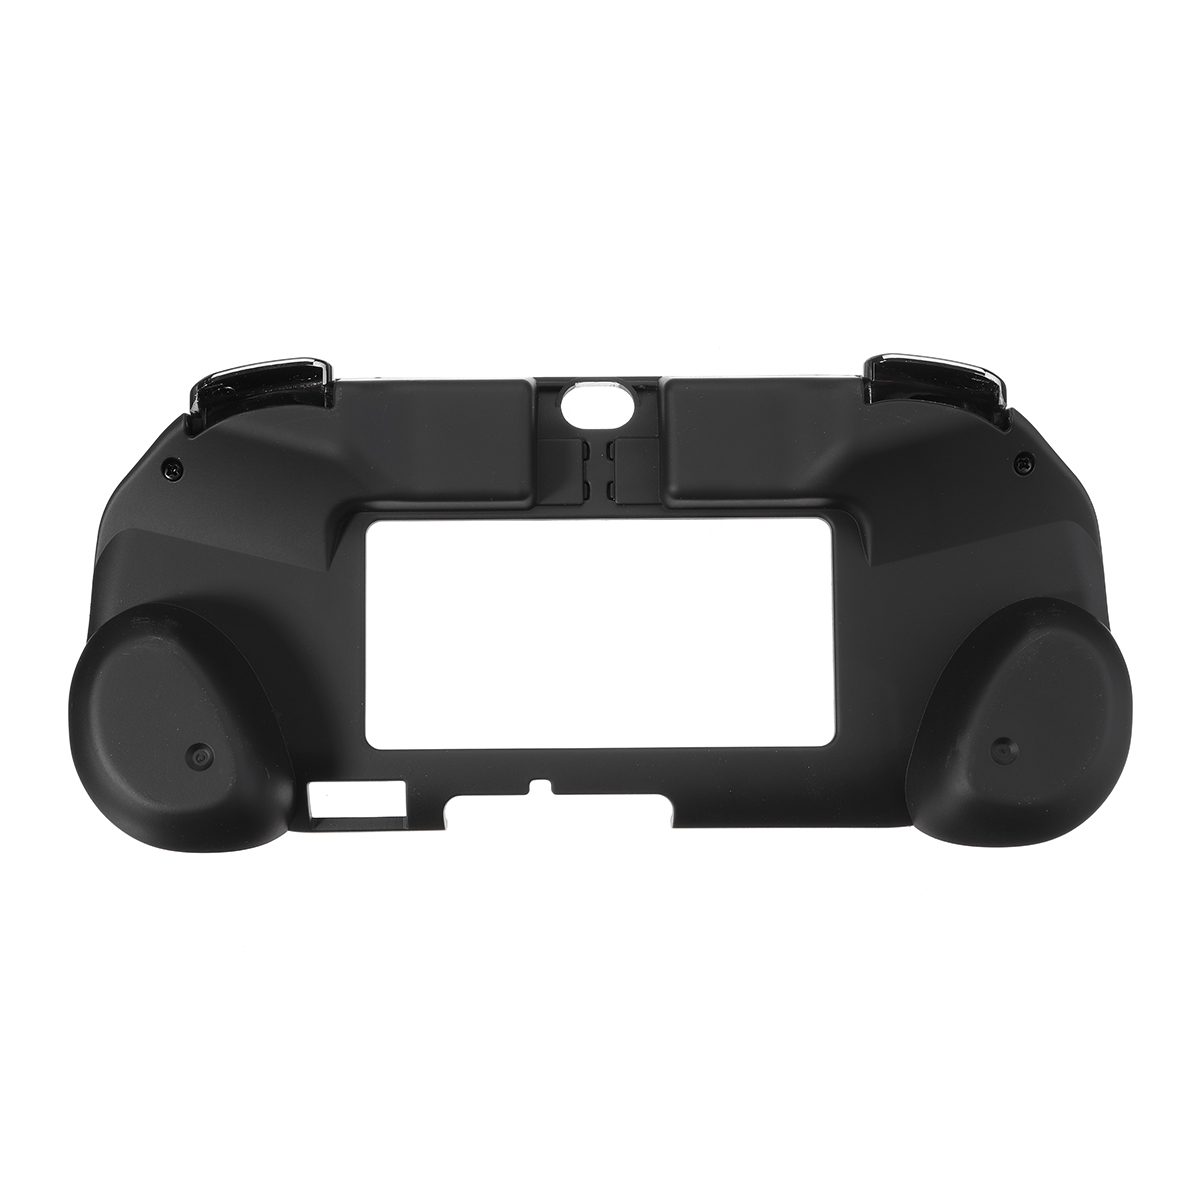 L2 R2 Trigger Grips Handle Shell Protective Case for Sony PlayStation PS Vita 2000 Game Console 13